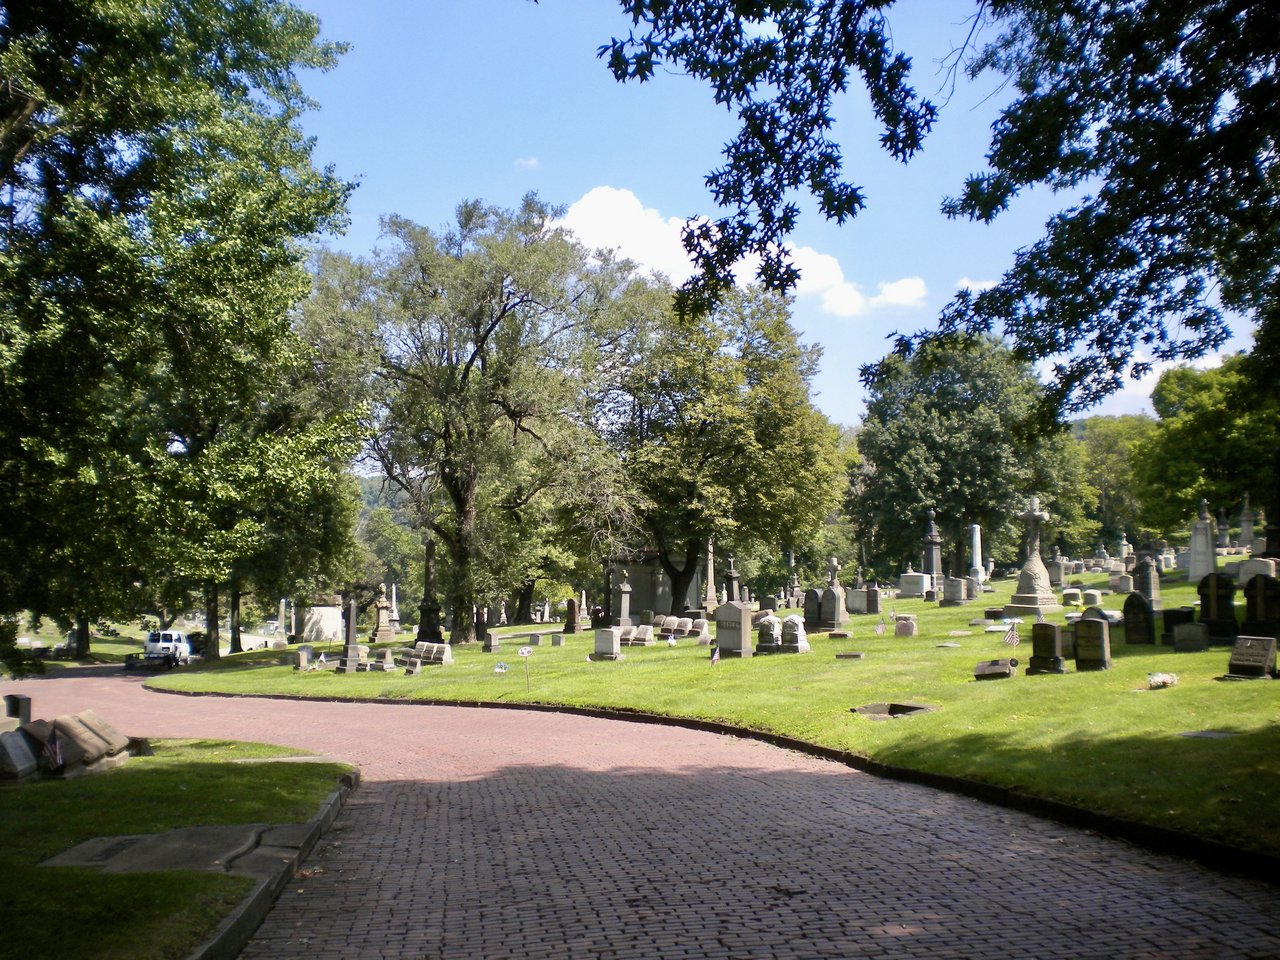 St Mary's Cemetary,
Pittsburgh